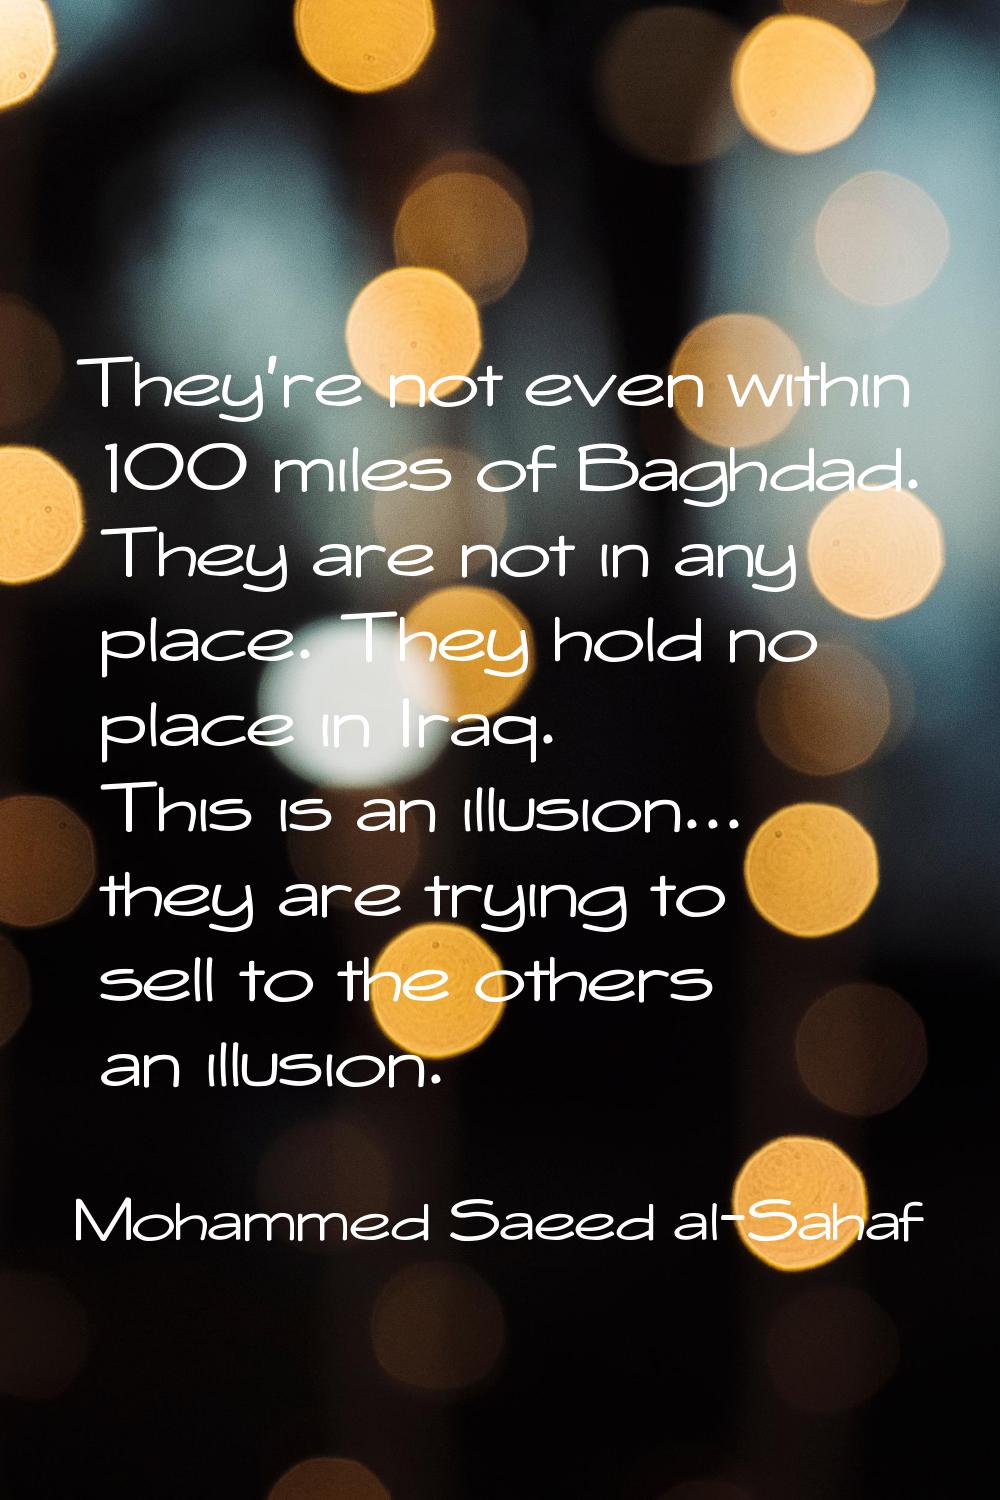 They're not even within 100 miles of Baghdad. They are not in any place. They hold no place in Iraq